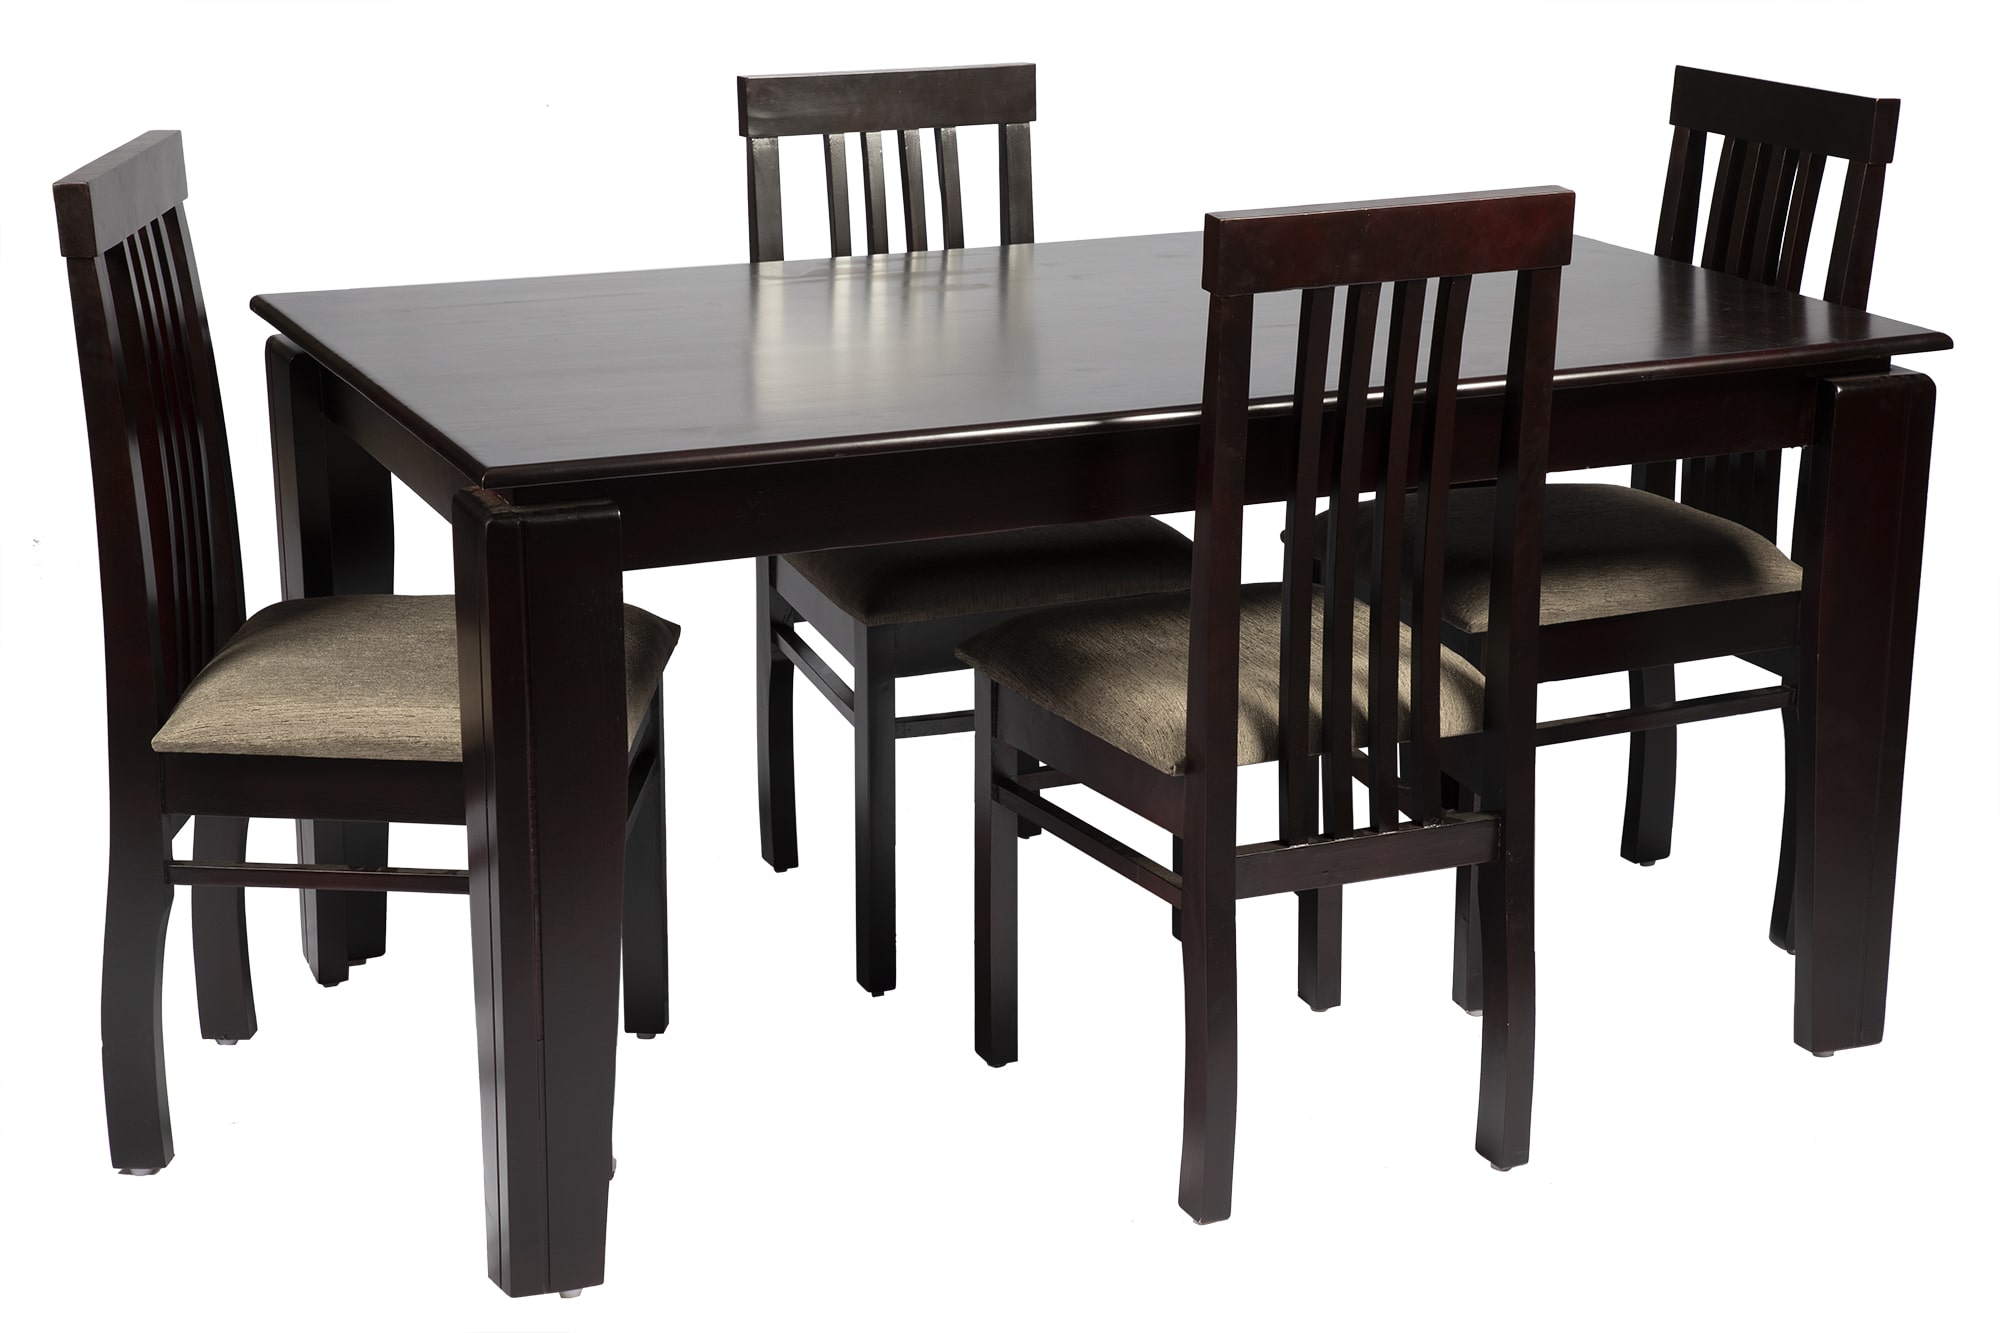 Ikea Dining Table Set With Bench | seeds.yonsei.ac.kr